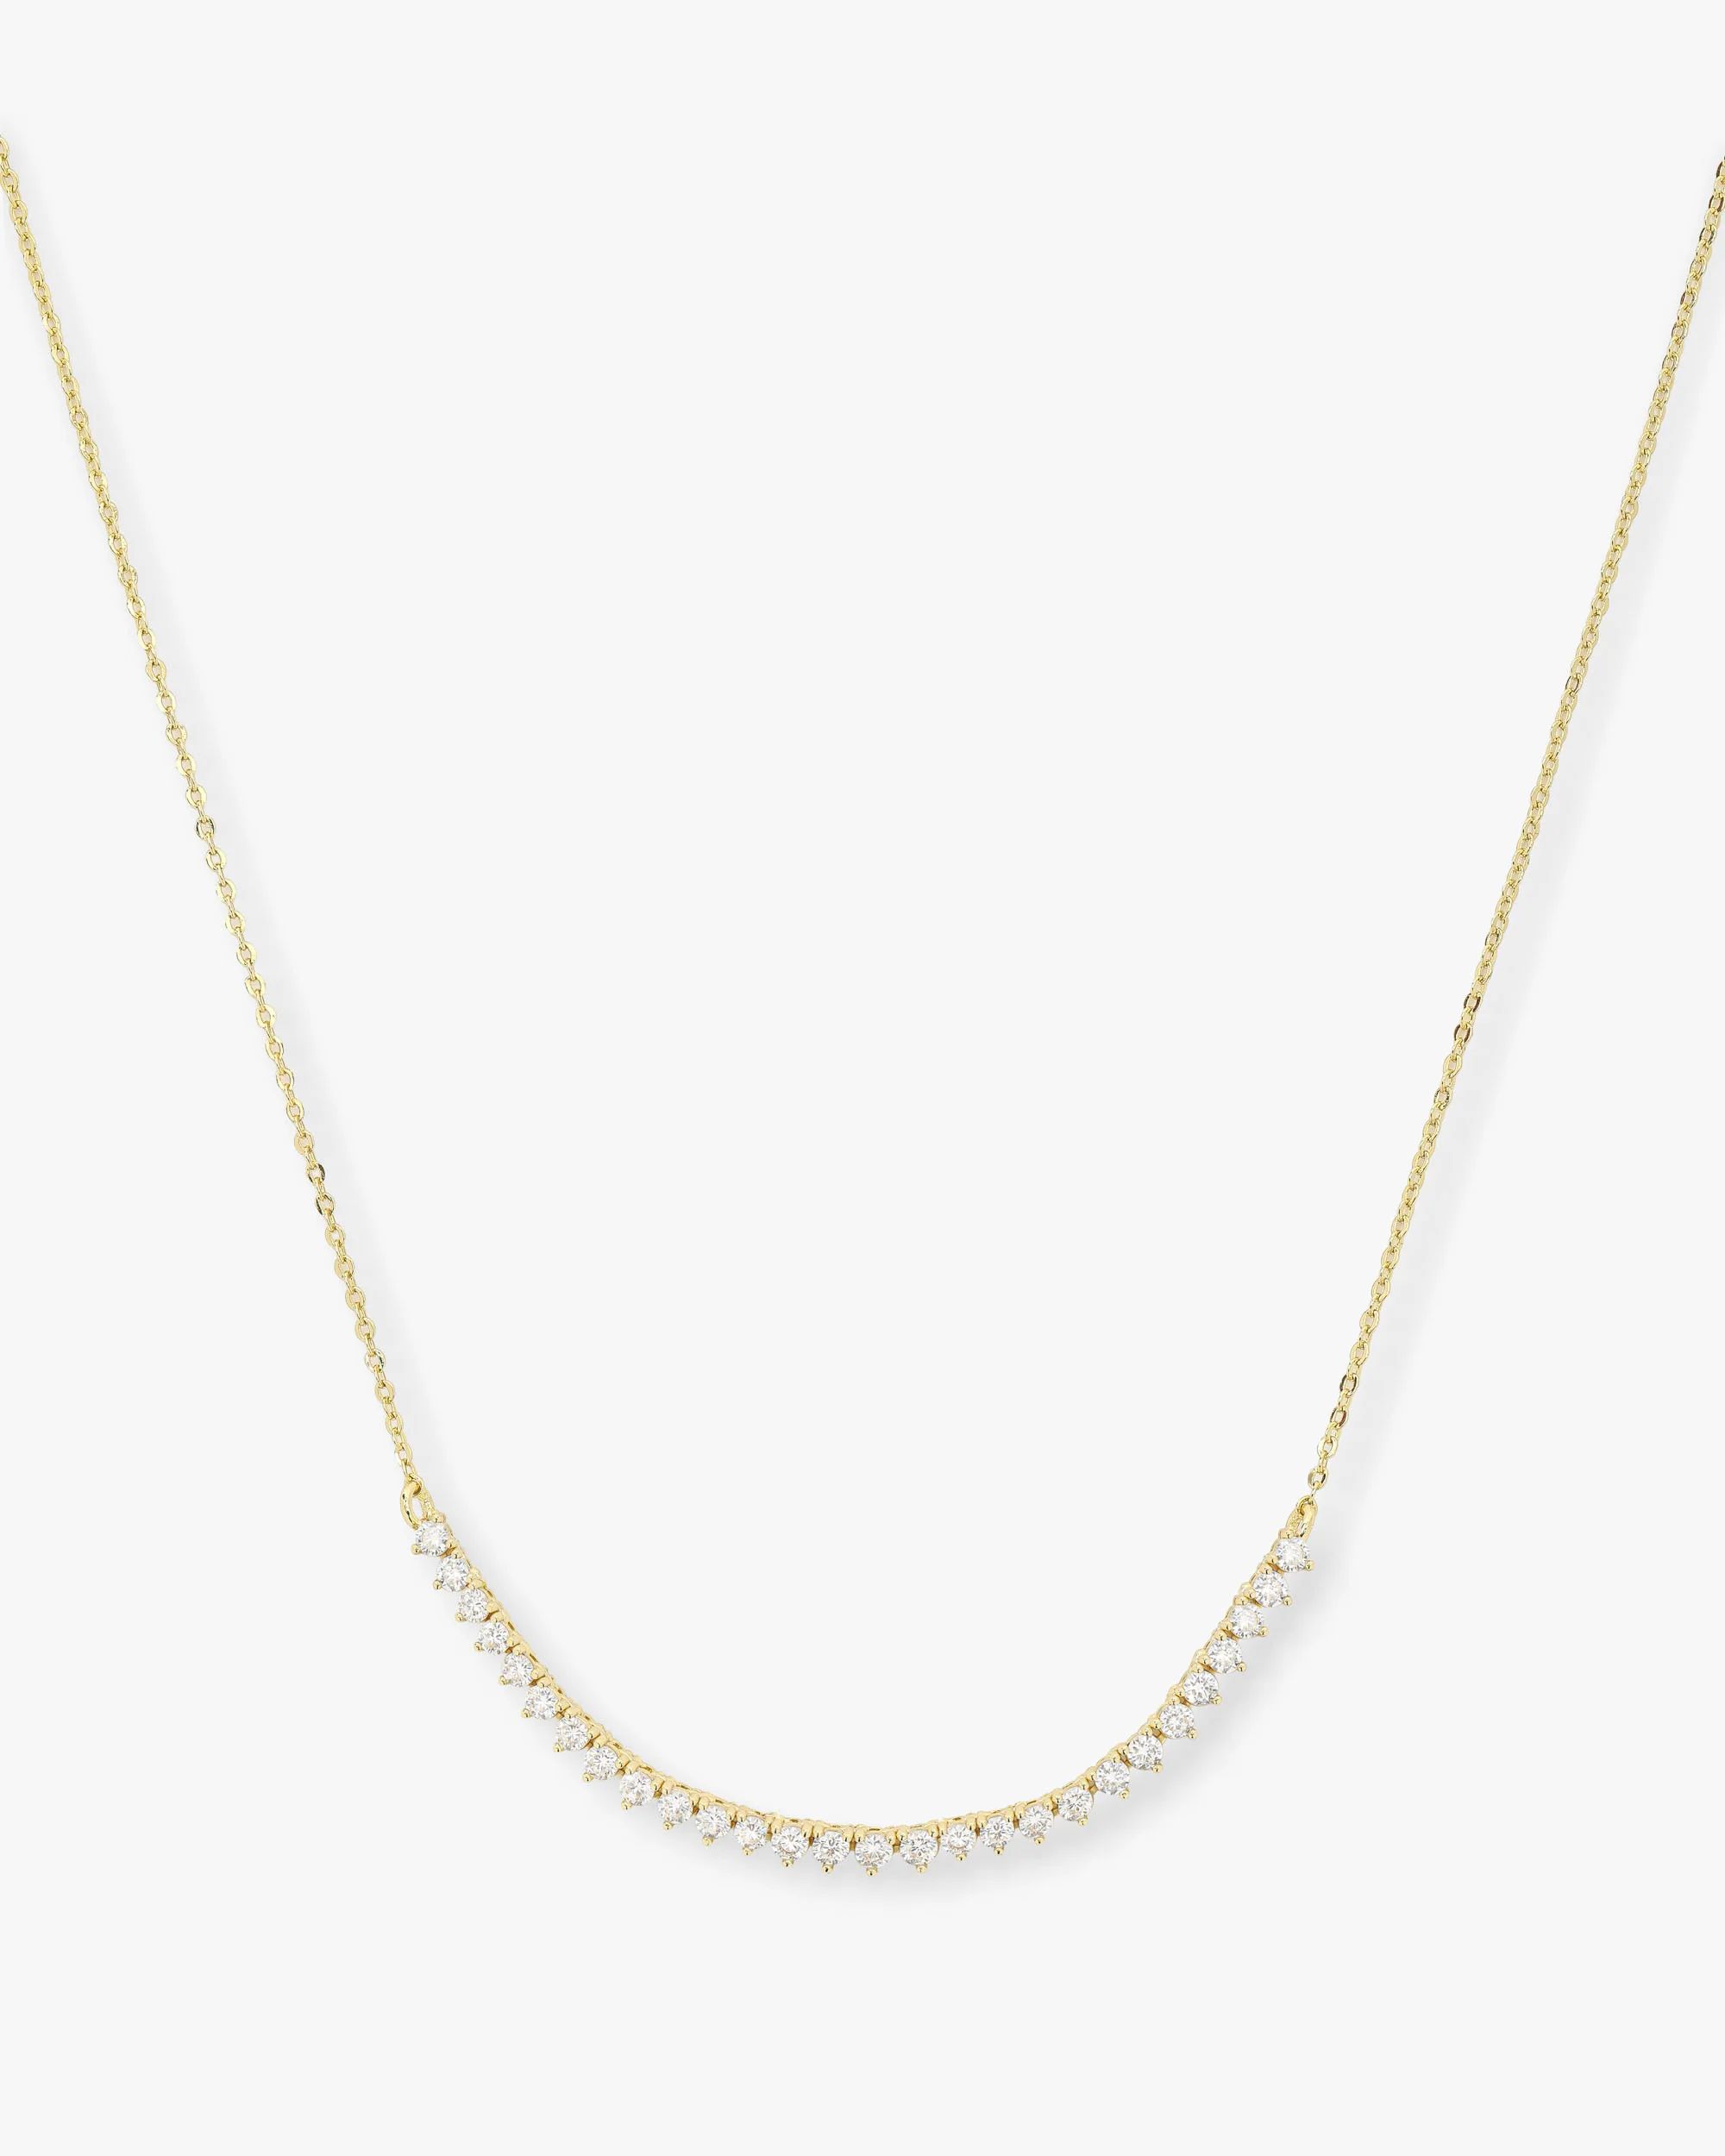 Baby Not Your Basic Tennis Chain Necklace - Gold|White Diamondettes | Melinda Maria